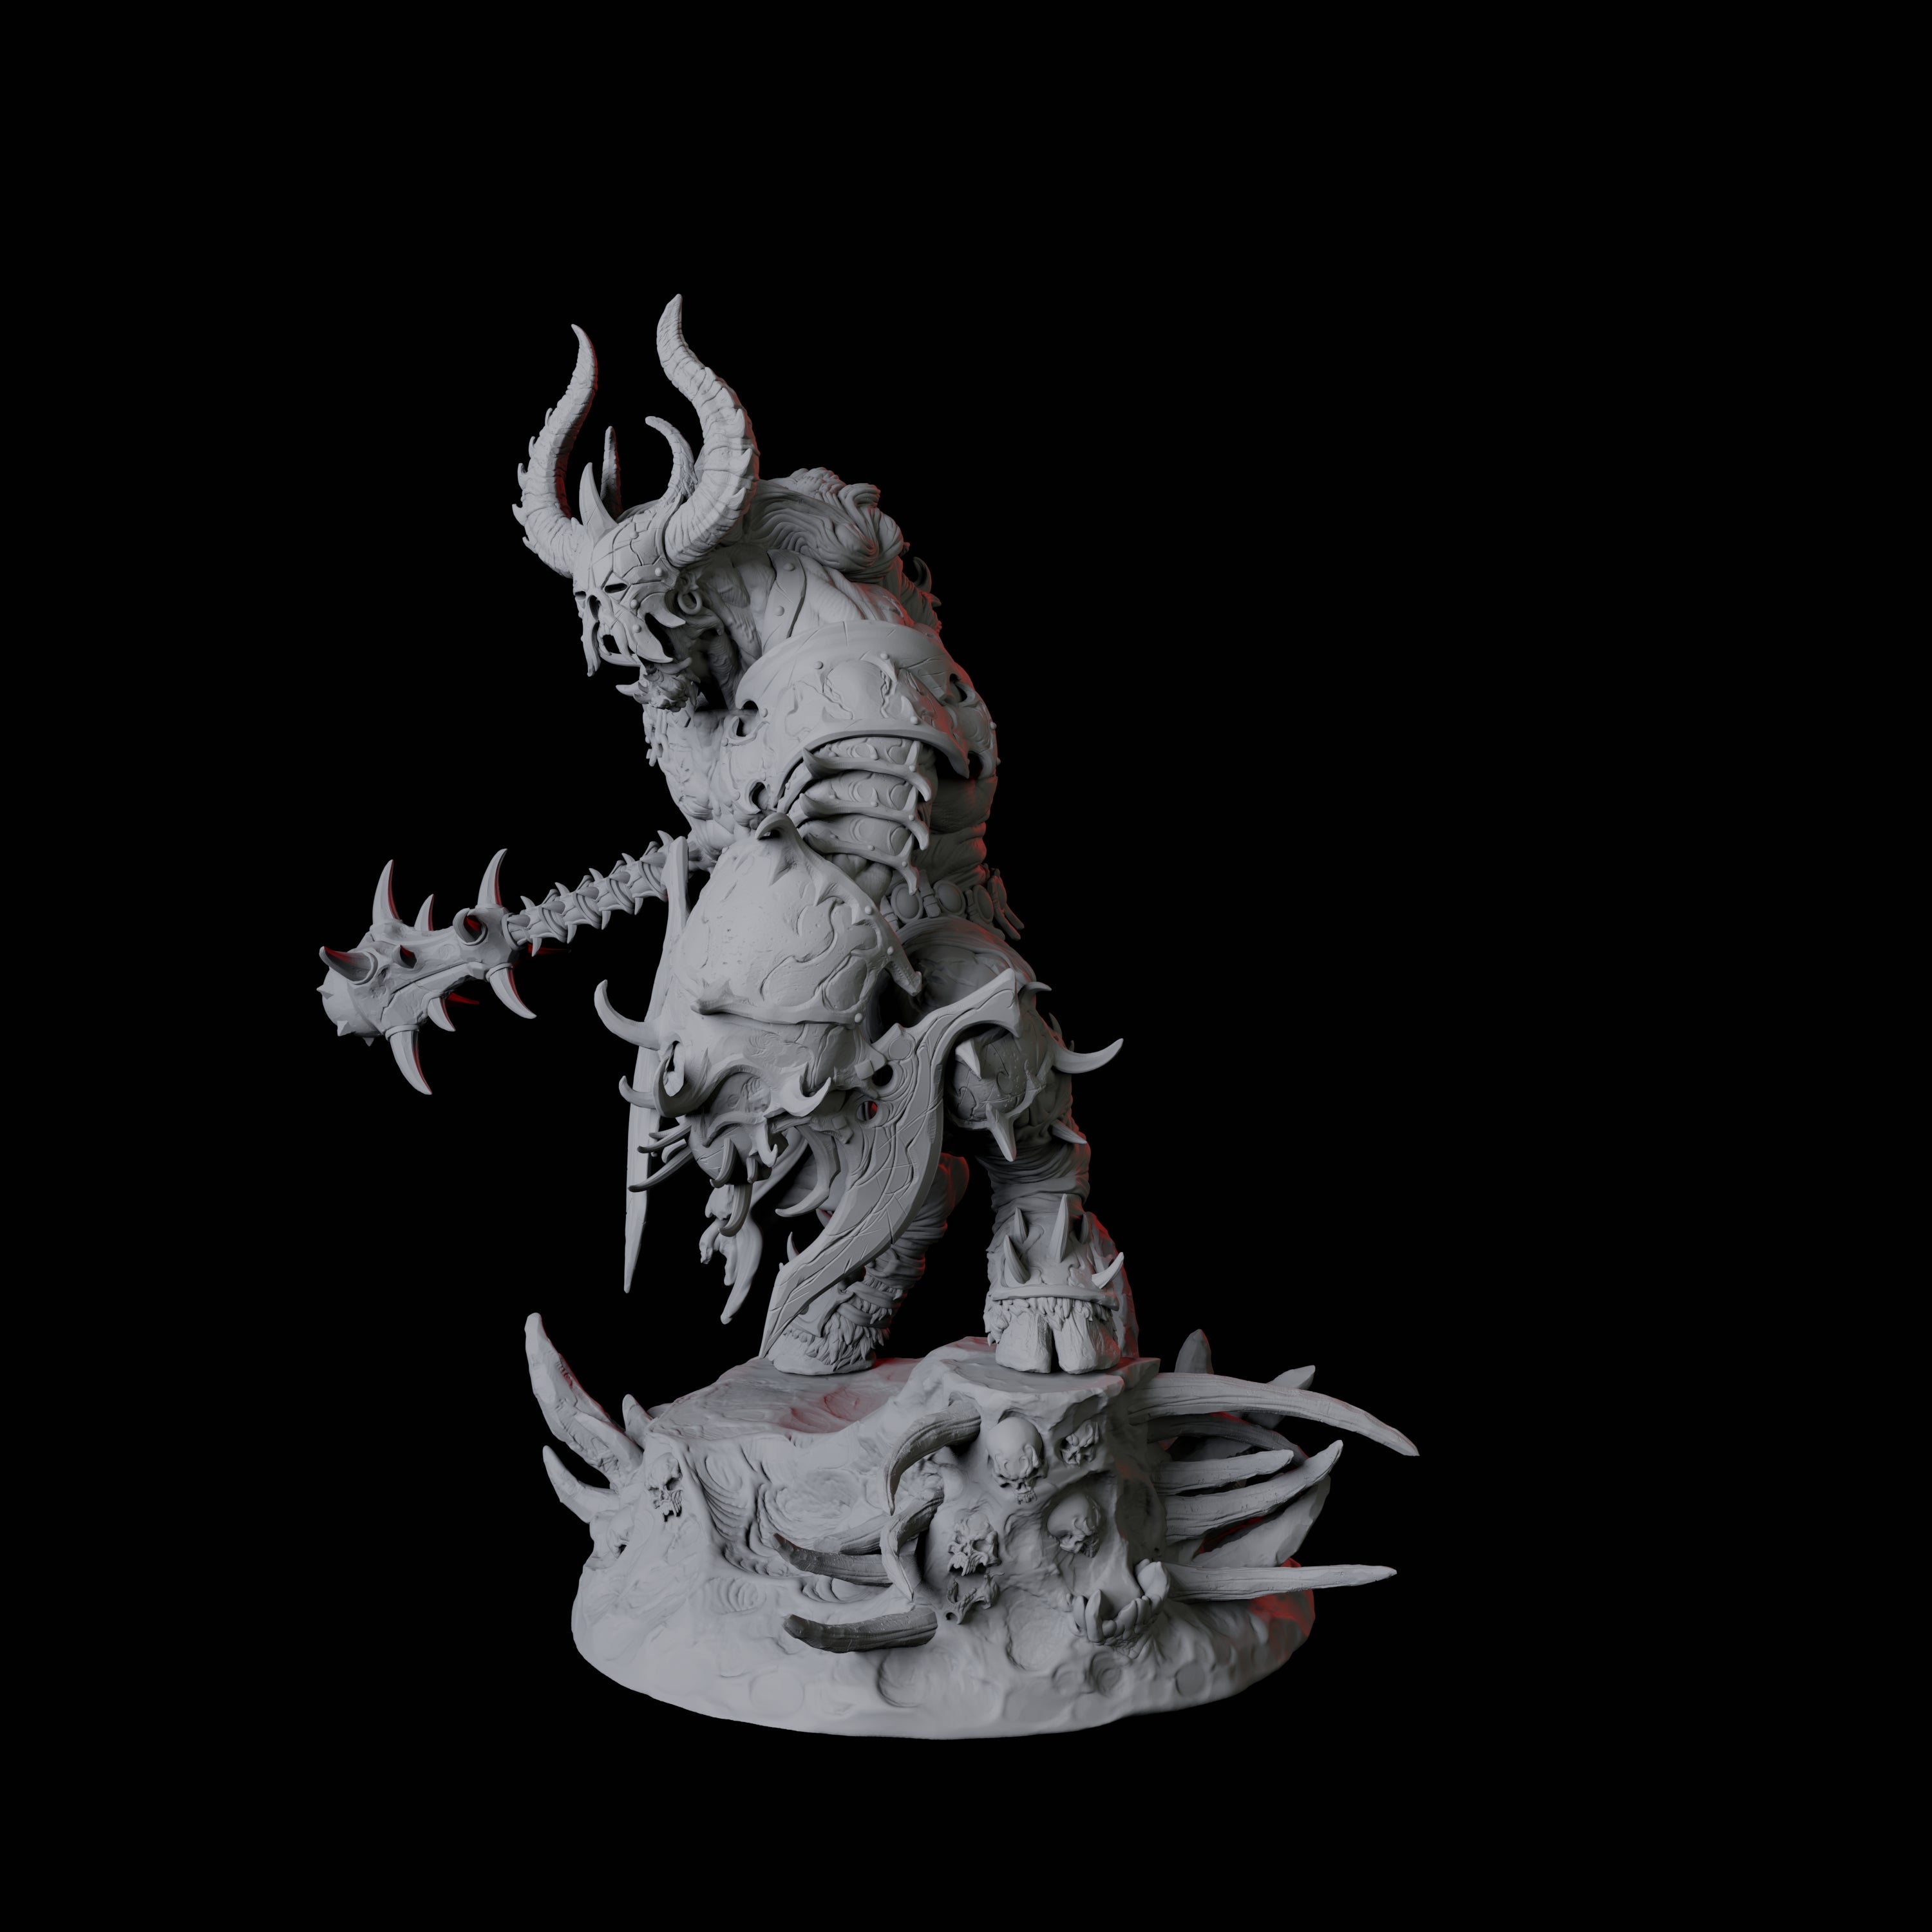 Savage Roru Demon C Miniature for Dungeons and Dragons, Pathfinder or other TTRPGs